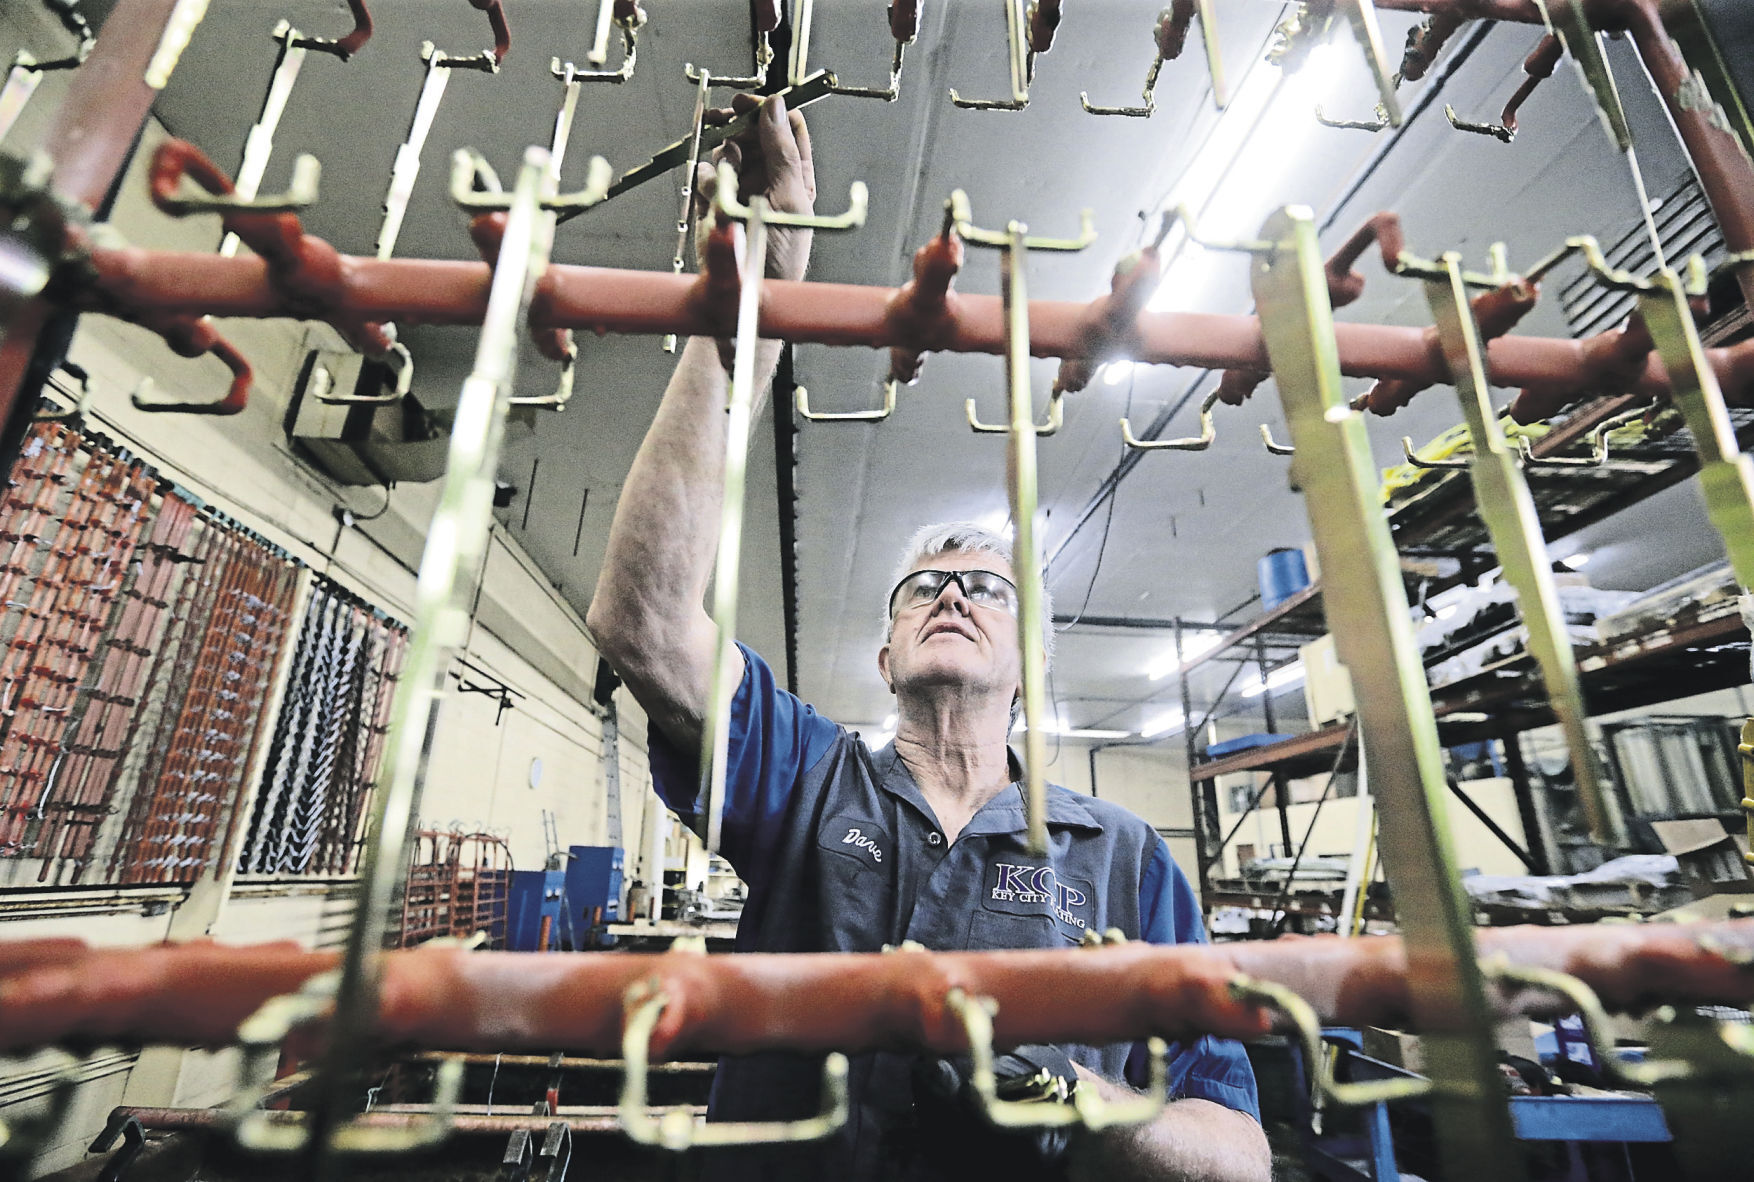 Dave Finn takes finished chain gauges from a rack at Key City Plating in Dubuque. PHOTO CREDIT: JESSICA REILLY